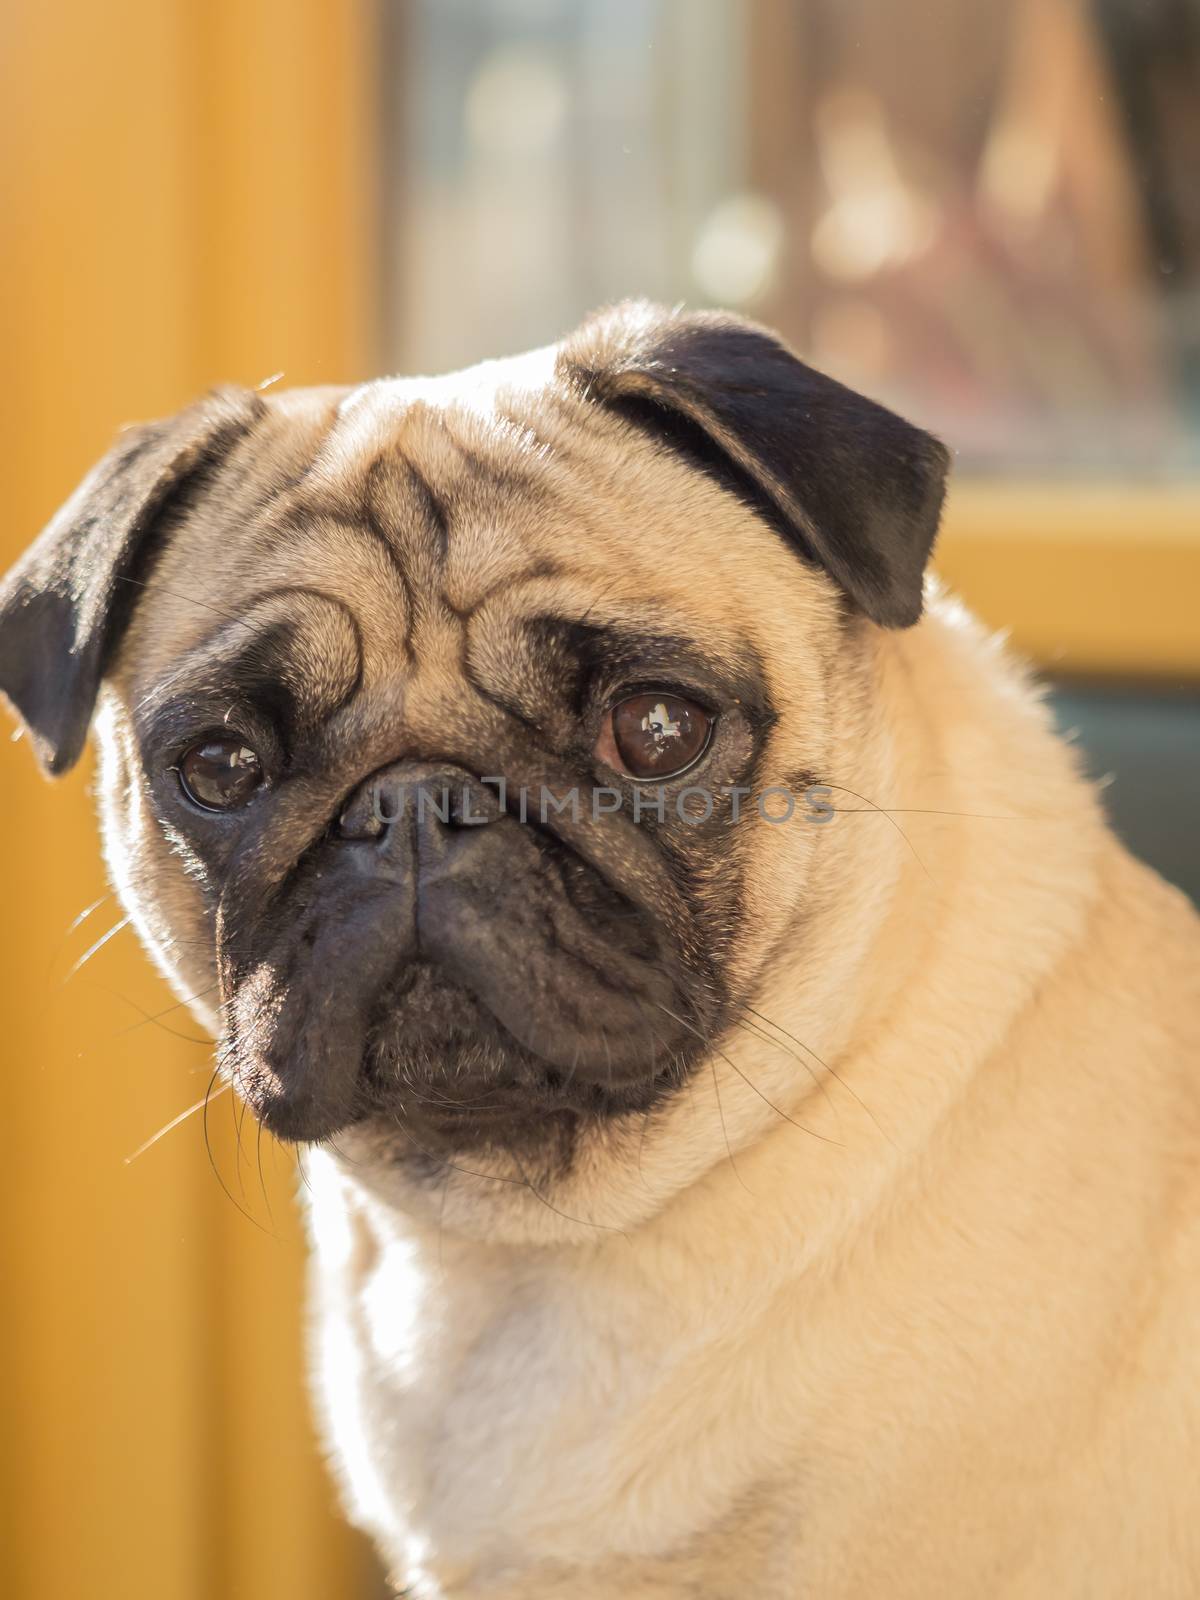 A portrait of a beautiful pug, only the head